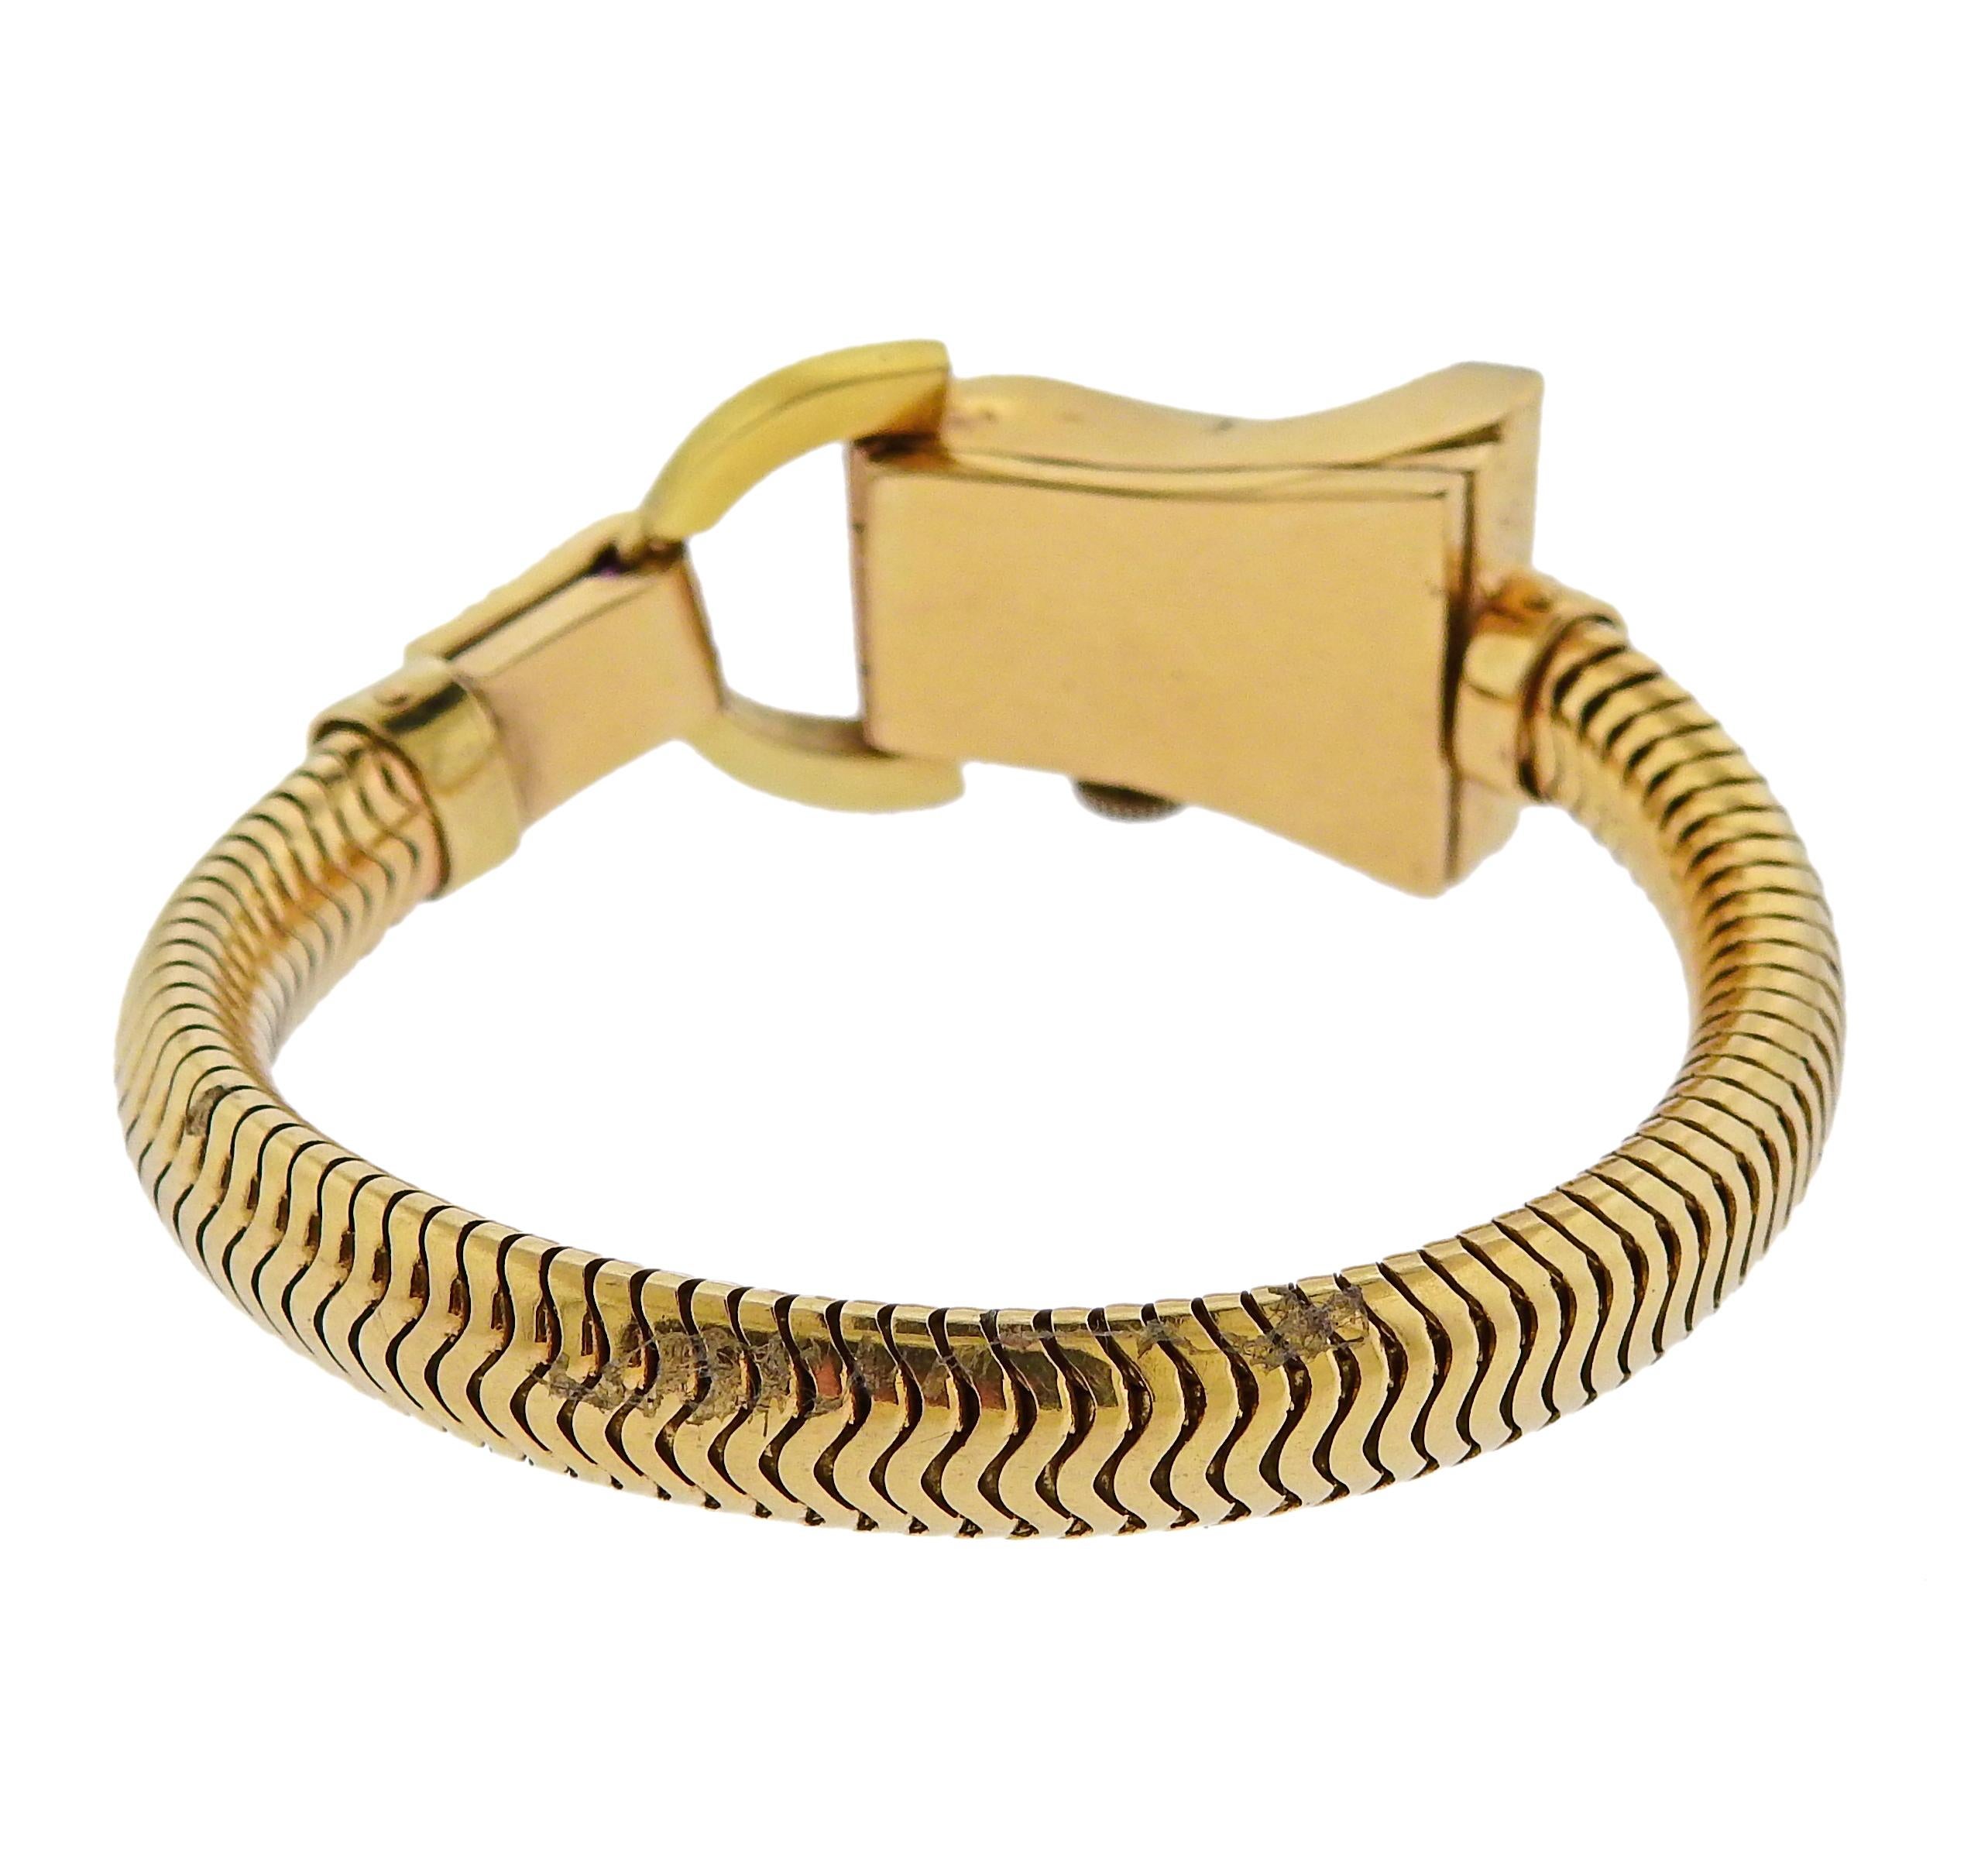 Retro 1940s Ruby Diamond Gold Watch Bracelet In Excellent Condition For Sale In New York, NY